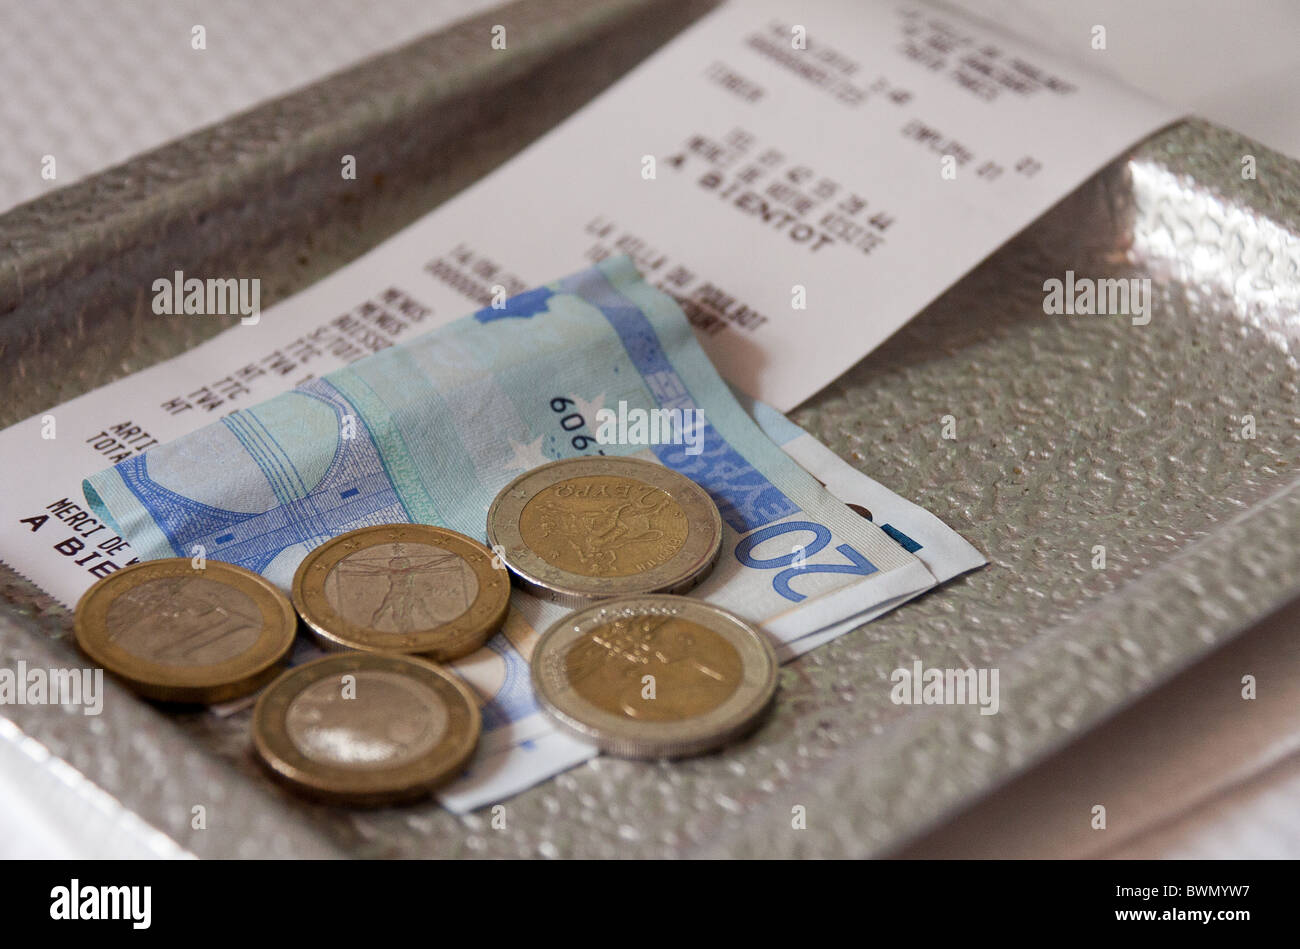 Restaurant bill with payment in Euros Stock Photo